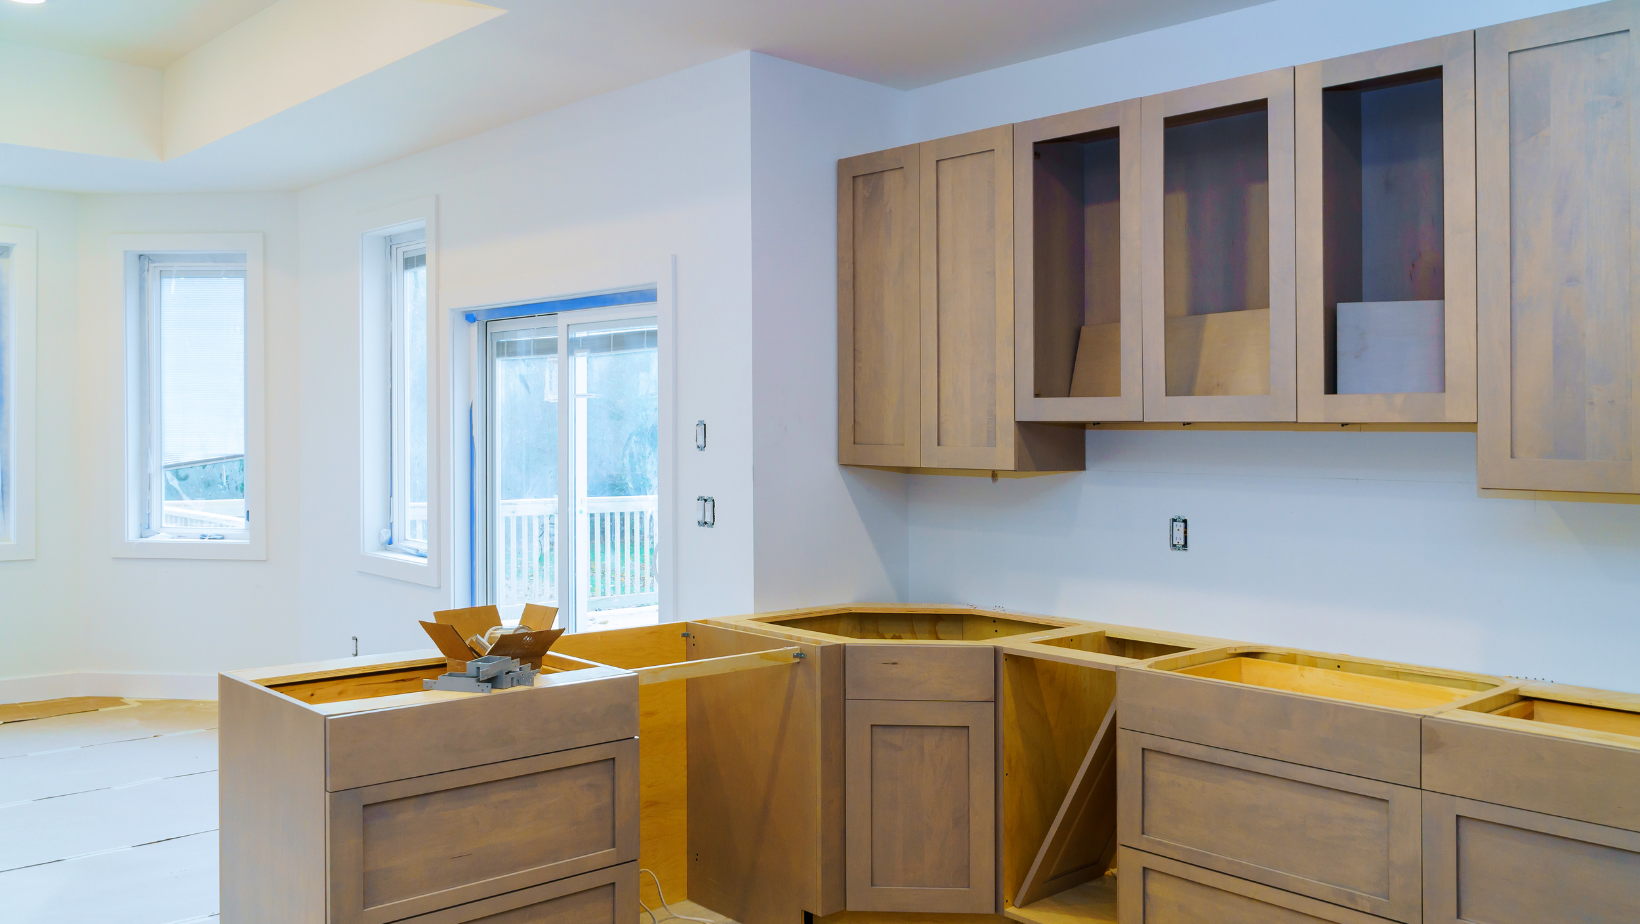 Wood Cabinets in Newly Remodeled Kitchen